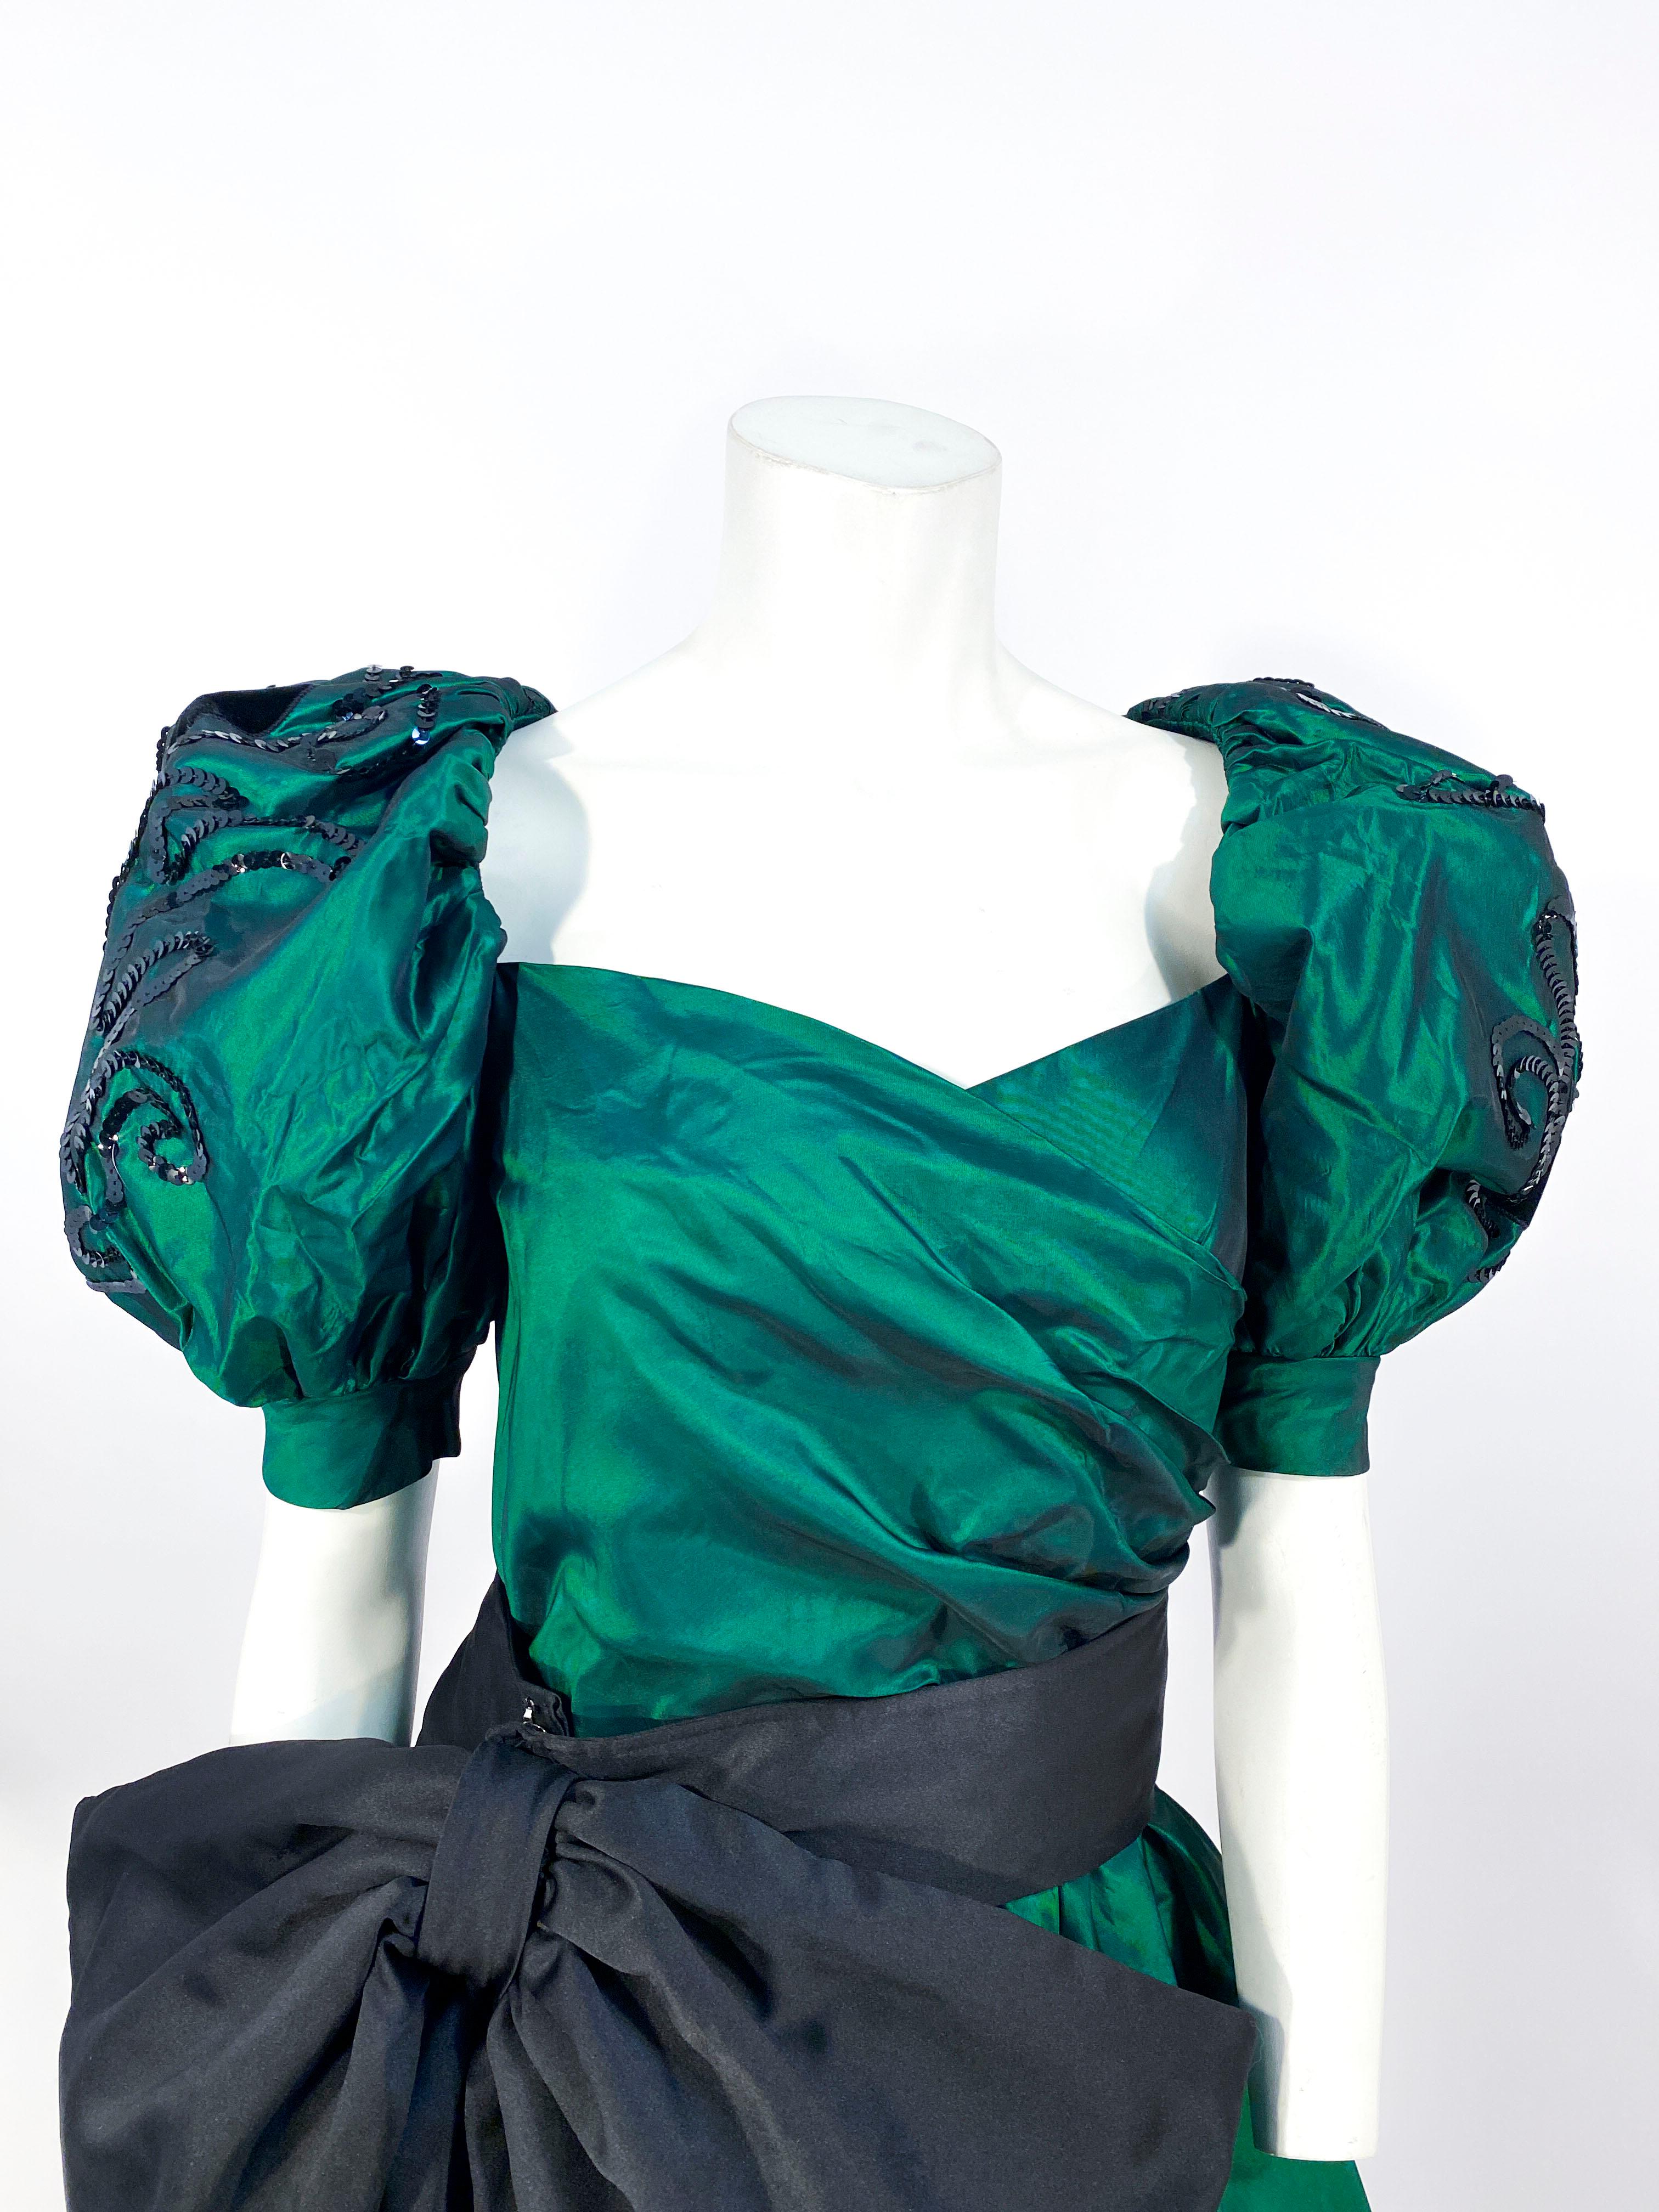 1980's Huey Waltzer dress with oversized puff sleeves, sequin and velvet appliqué accents, ruching along the bodice, and a full ballon skirt lined in taffeta for structure. This piece also has a removable enlarged black bow cummerbund worn on the